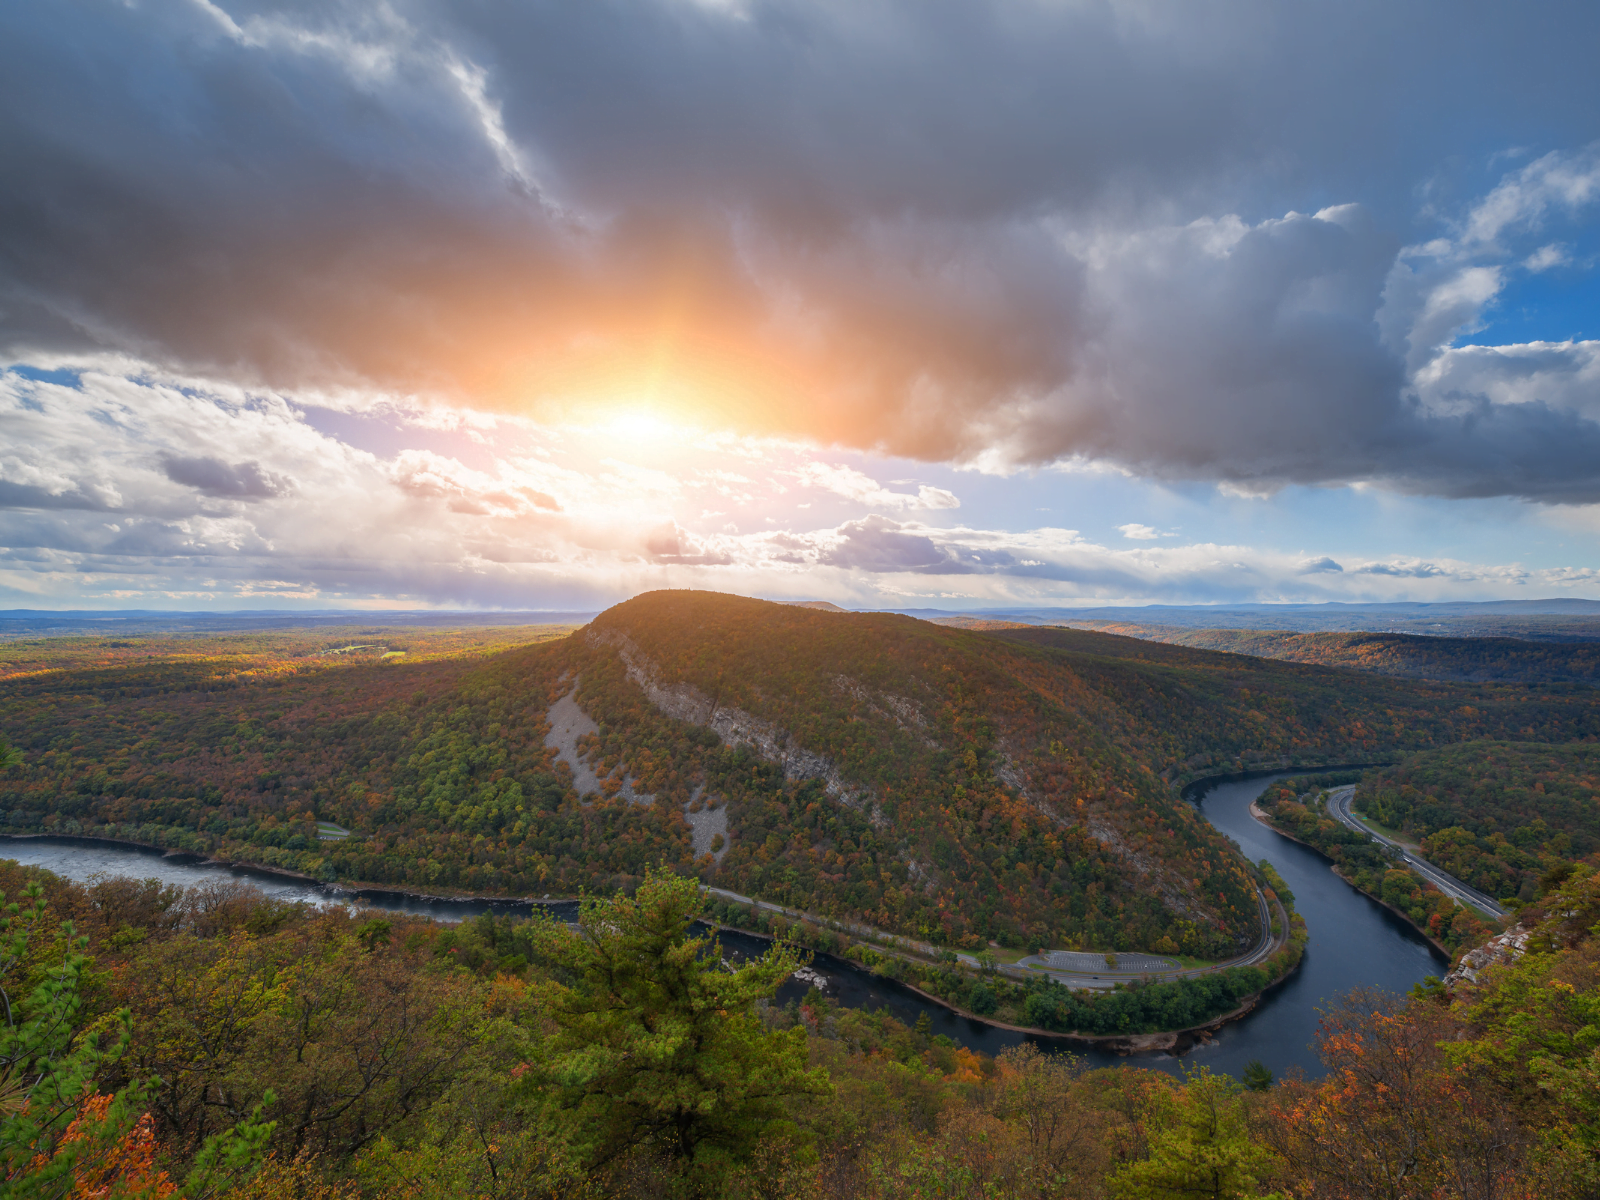 Show off Your Smile at the Most Instagrammable Locations in the Poconos